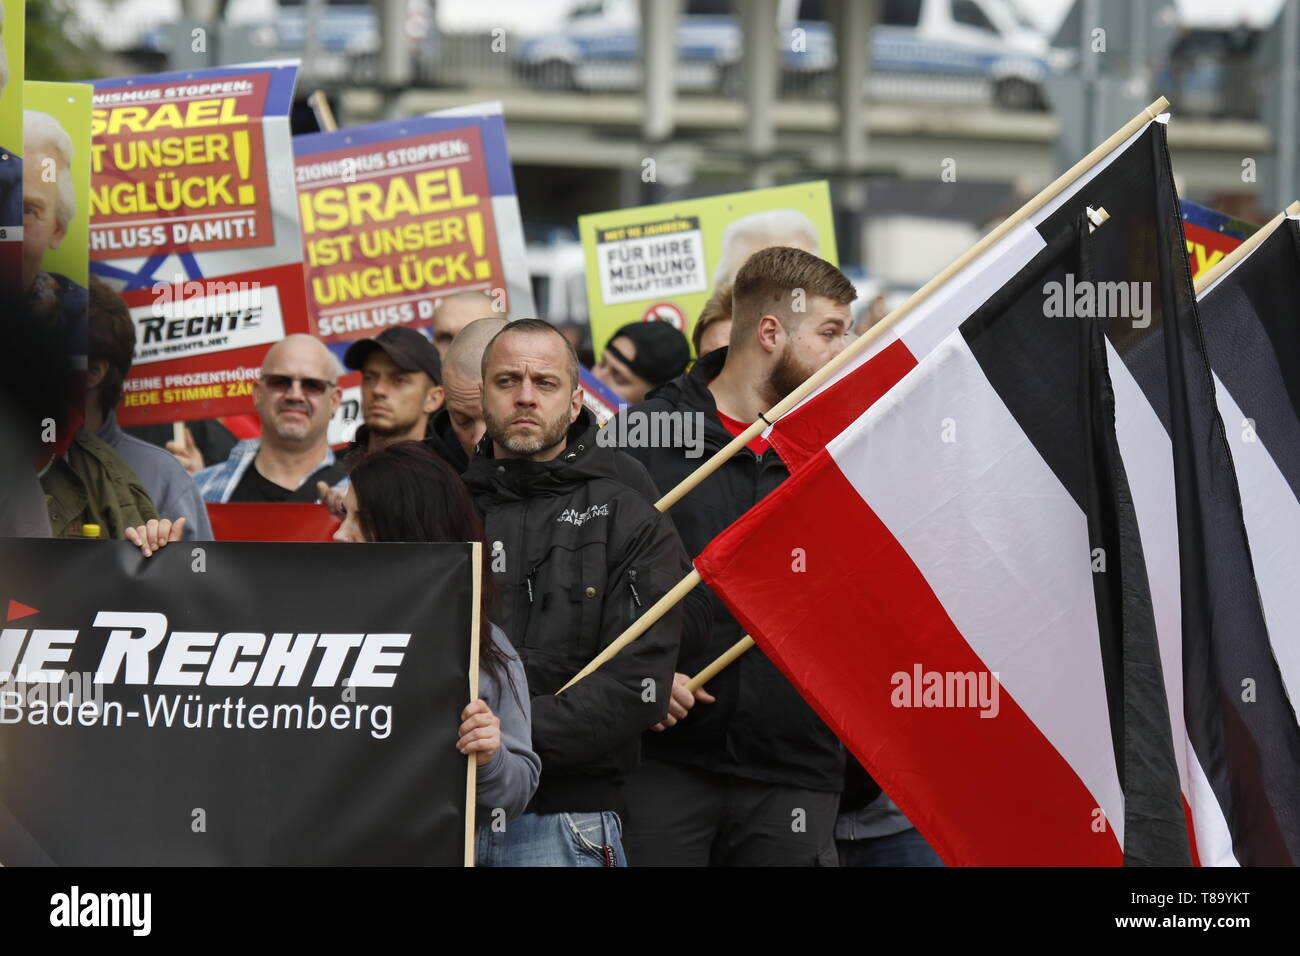 Pforzheim, Germany. 11th May 2019. The right-wing protesters march with banners, posters and flags of the German Empire through the city centre. Around 80 people participated in a march through Pforzheim, organised by the right-wing party ‘Die Rechte’ (The Right). The main issues of the march was the promotion of voting for Die Rechte’ in the upcoming European Election and their anti-immigration policies. They were confronted by several hundred counter-protesters from different political organisations. Stock Photo